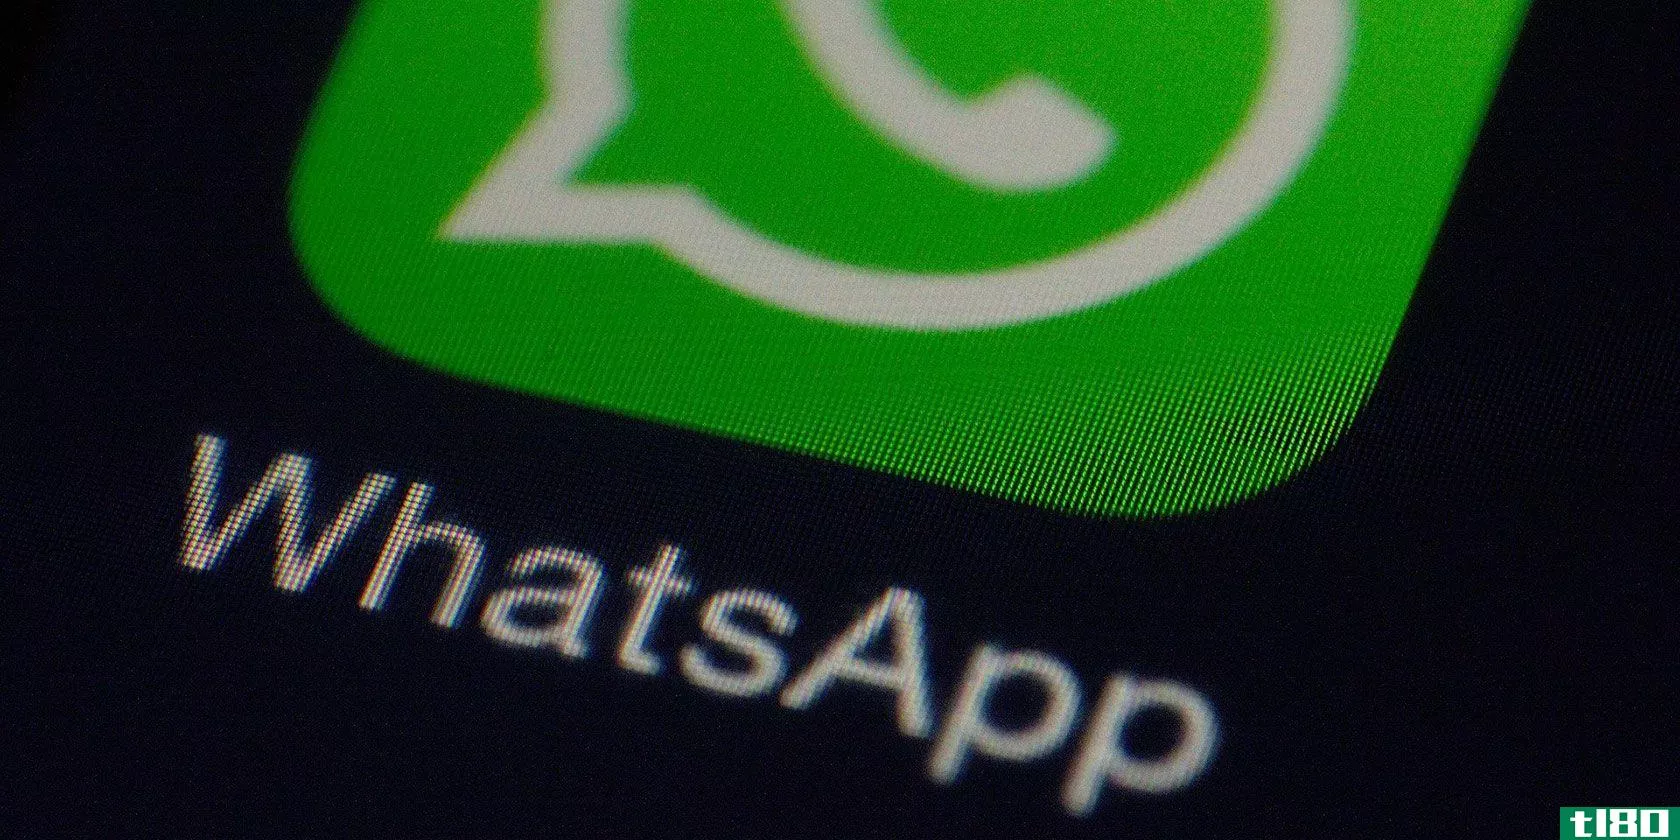 Make WhatsApp messages disappear after 24 hours